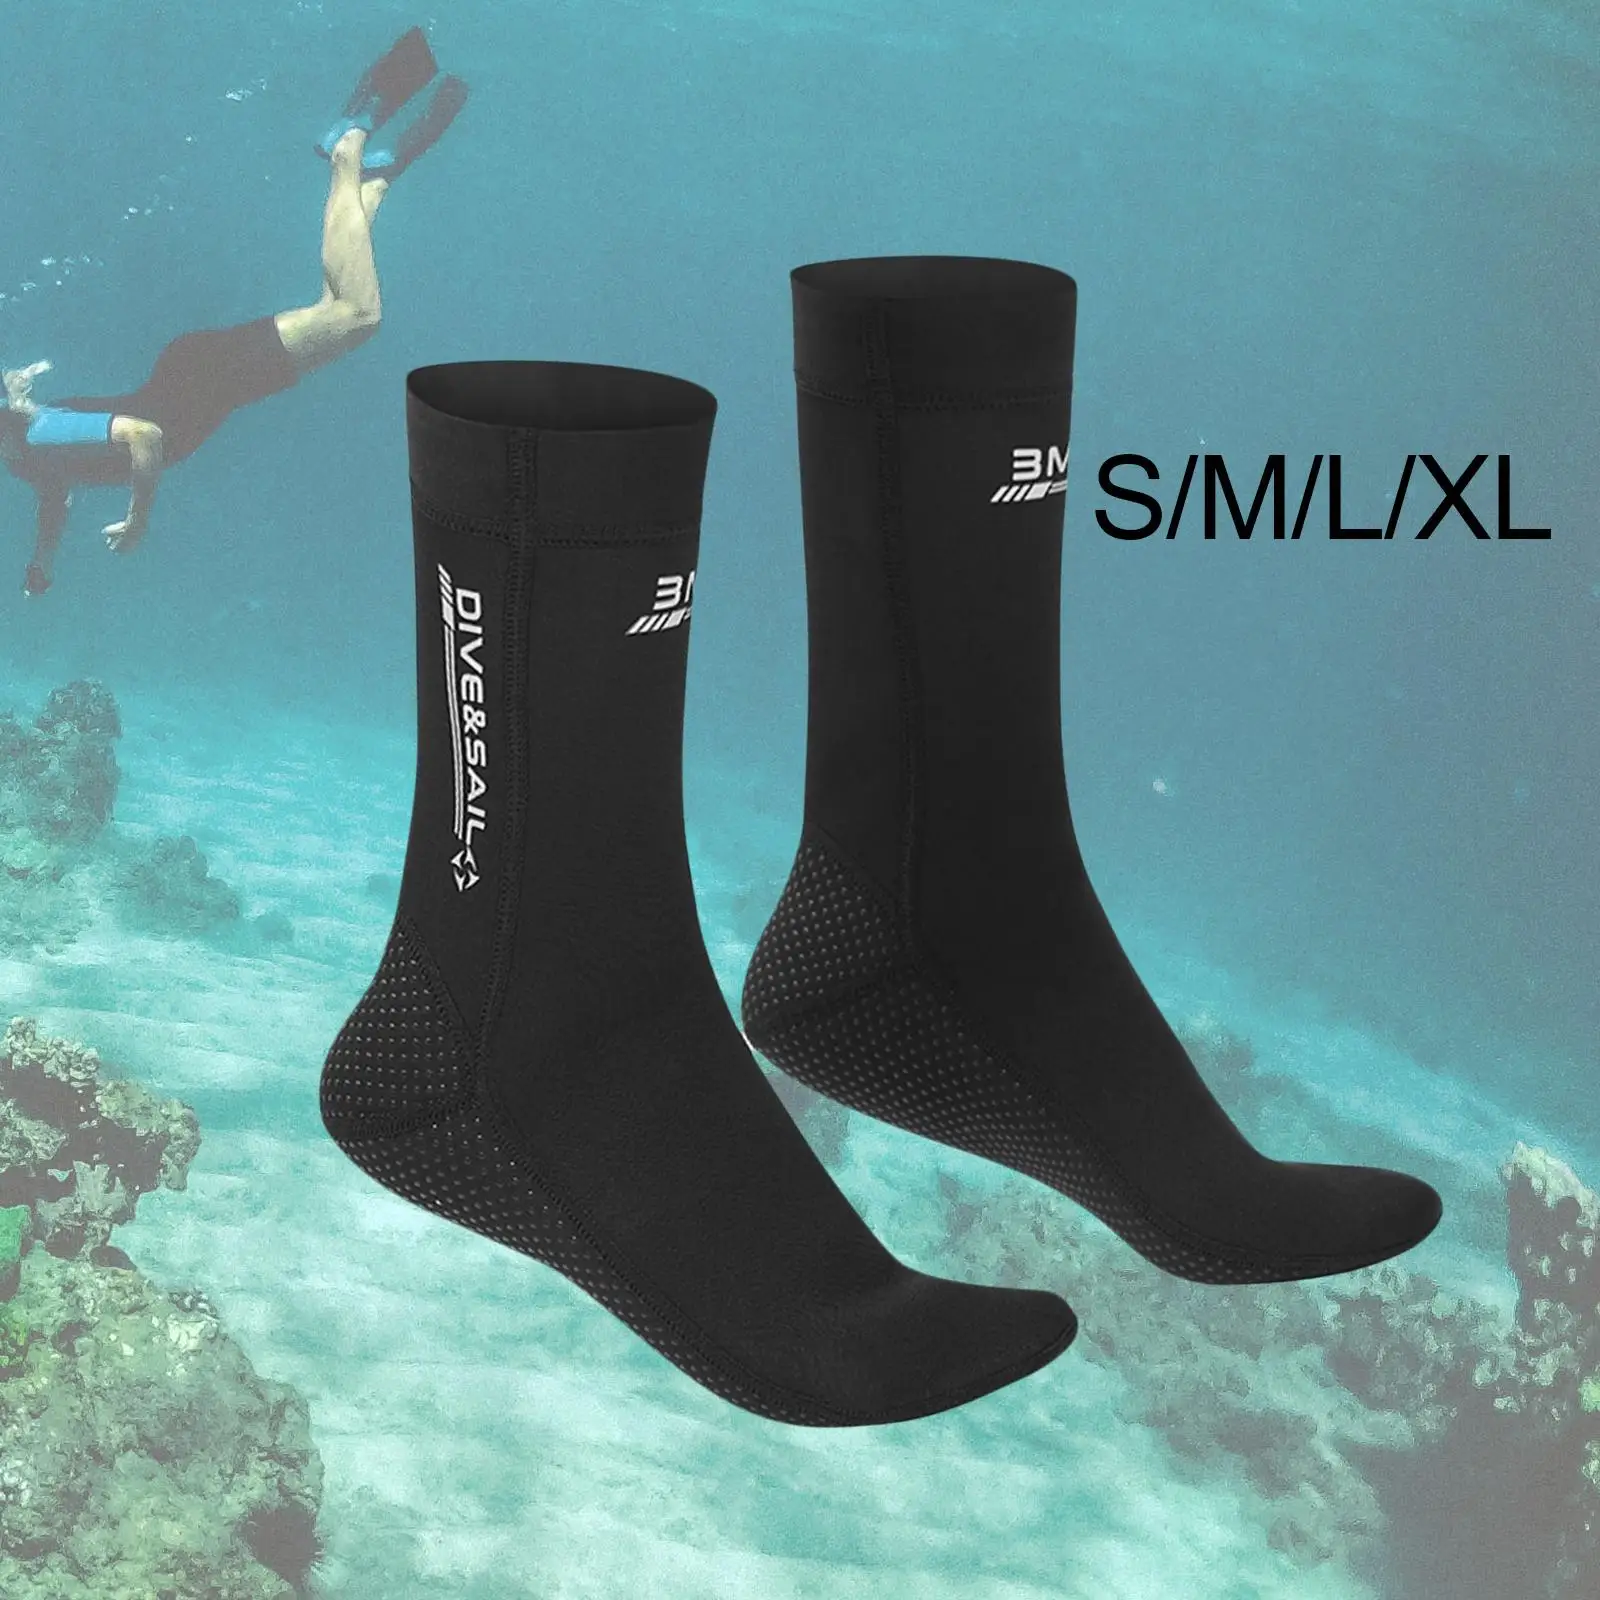 Diving Socks Water Socks Sand Proof Wetsuit Water Resistant Non Slip Beach Boots for Swimming Outdoor Activities Unisex Adult